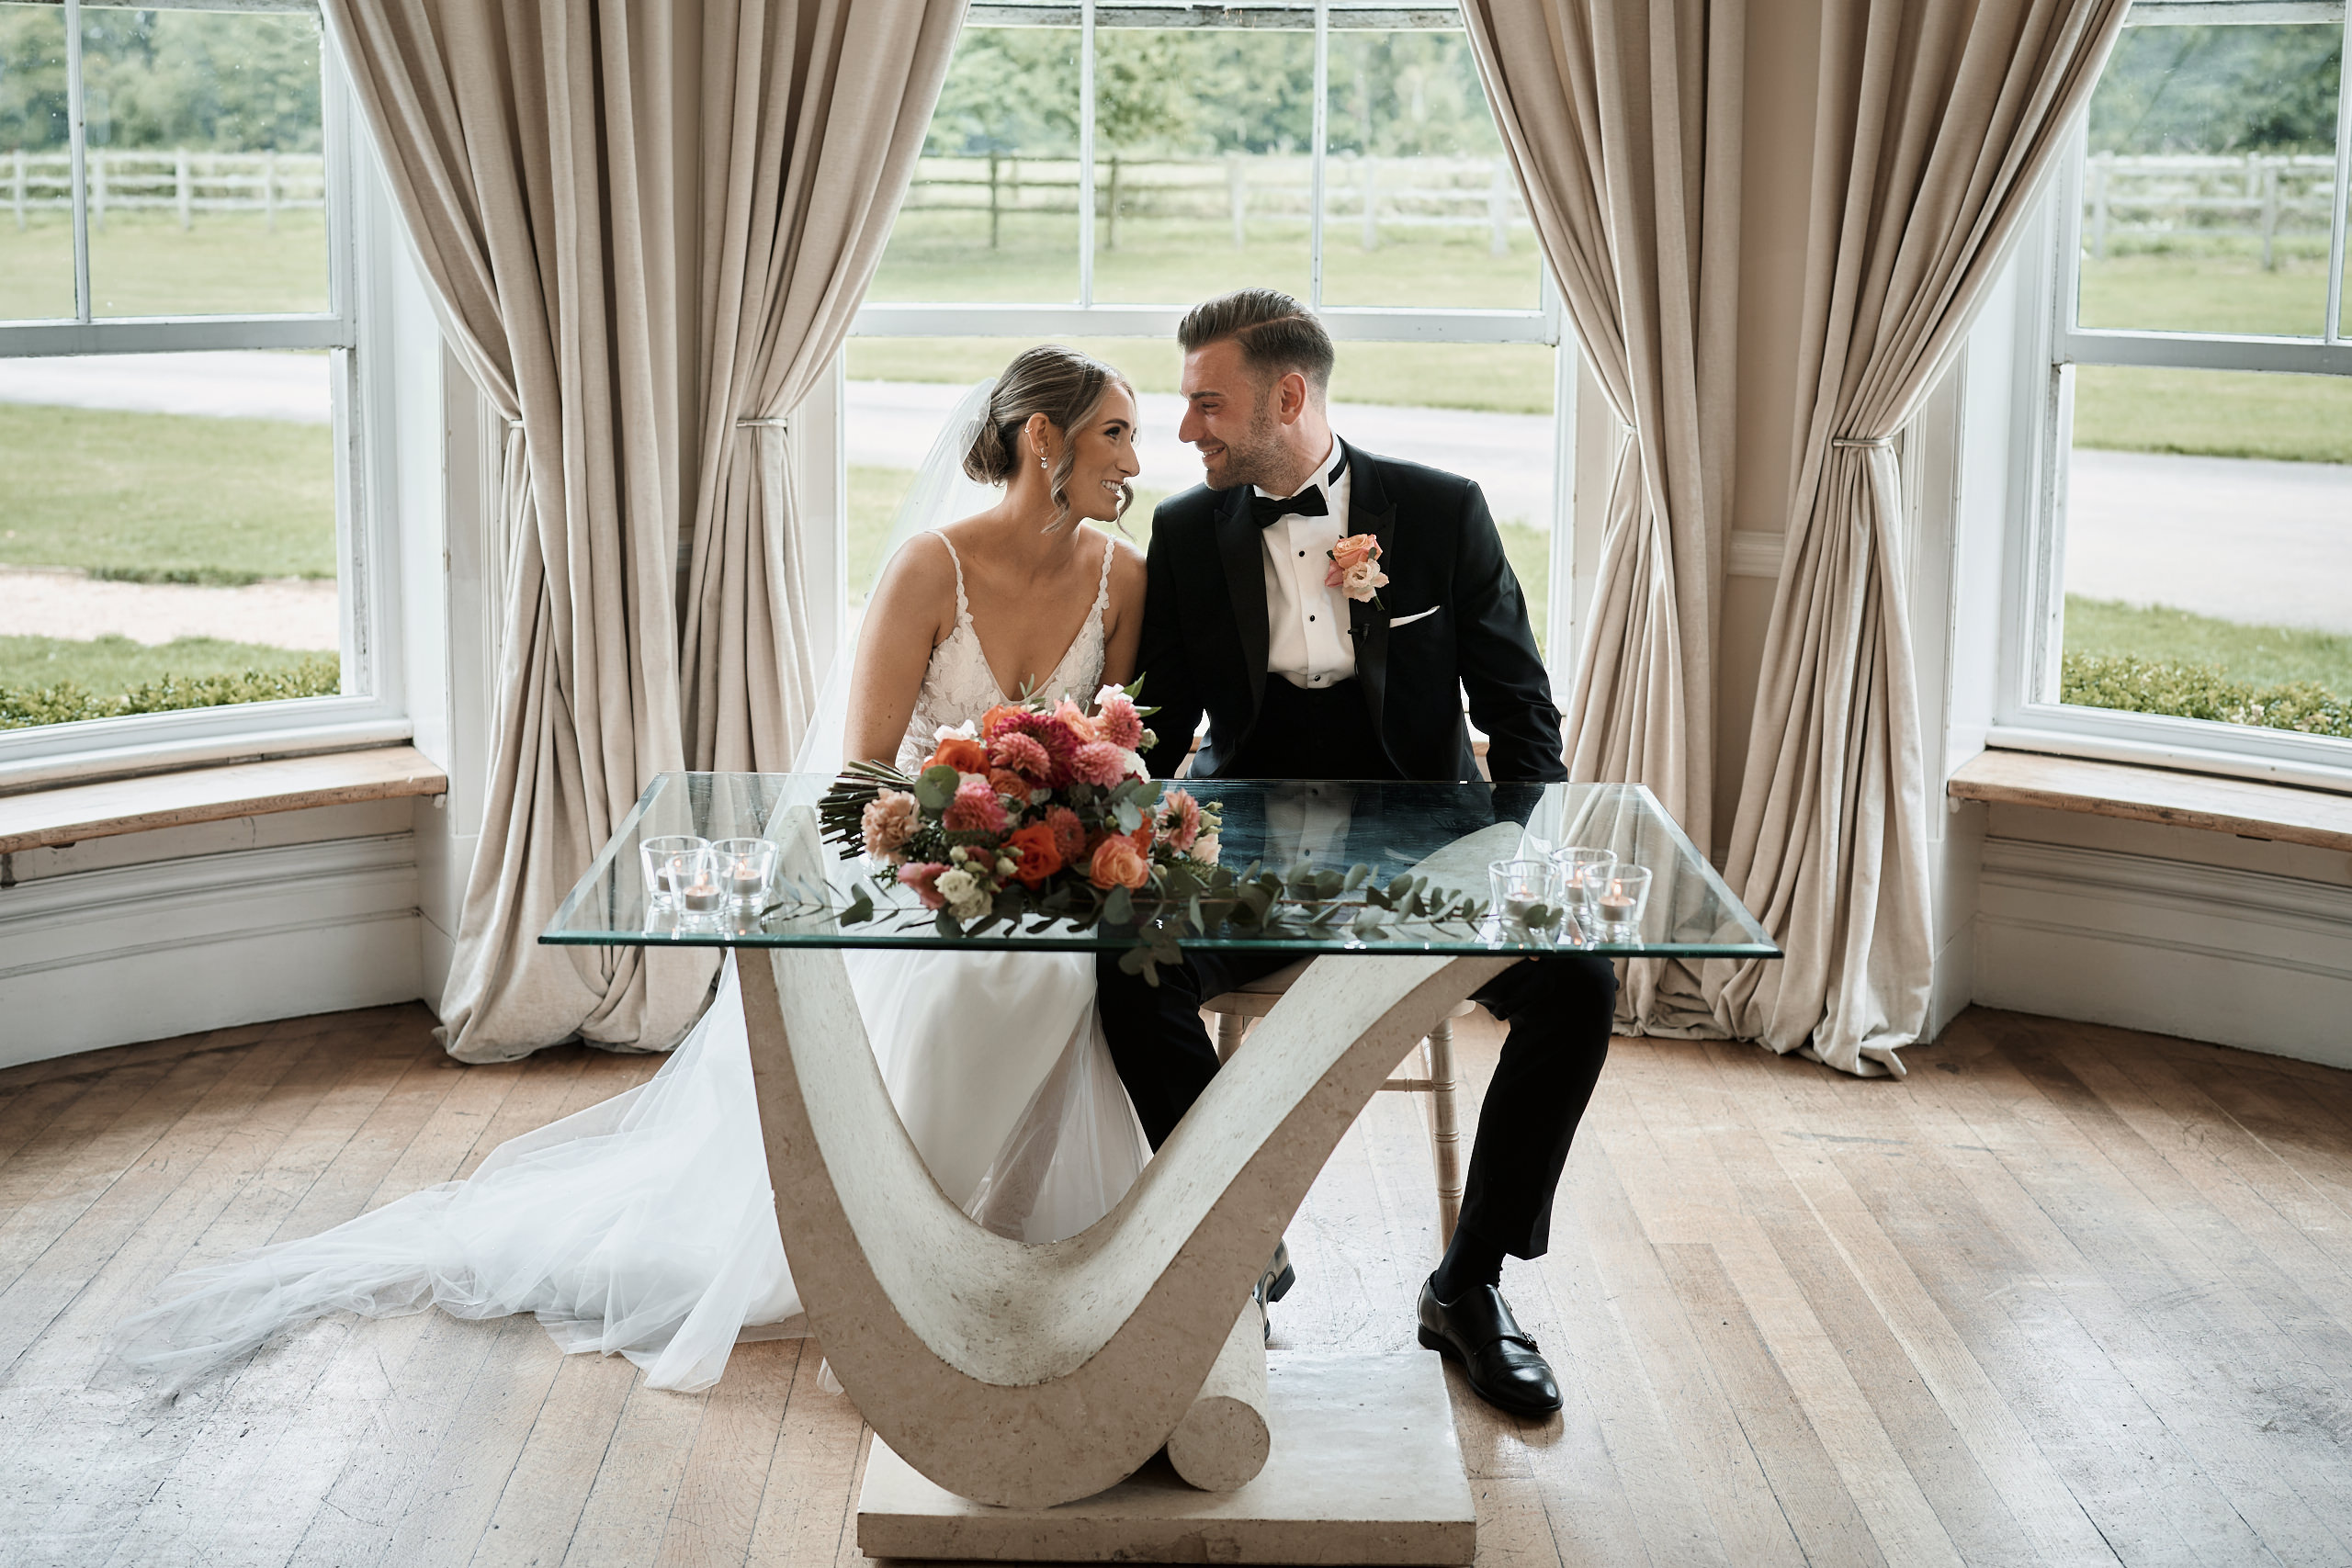 A bride and groom sitting at a table in a room with large windows.